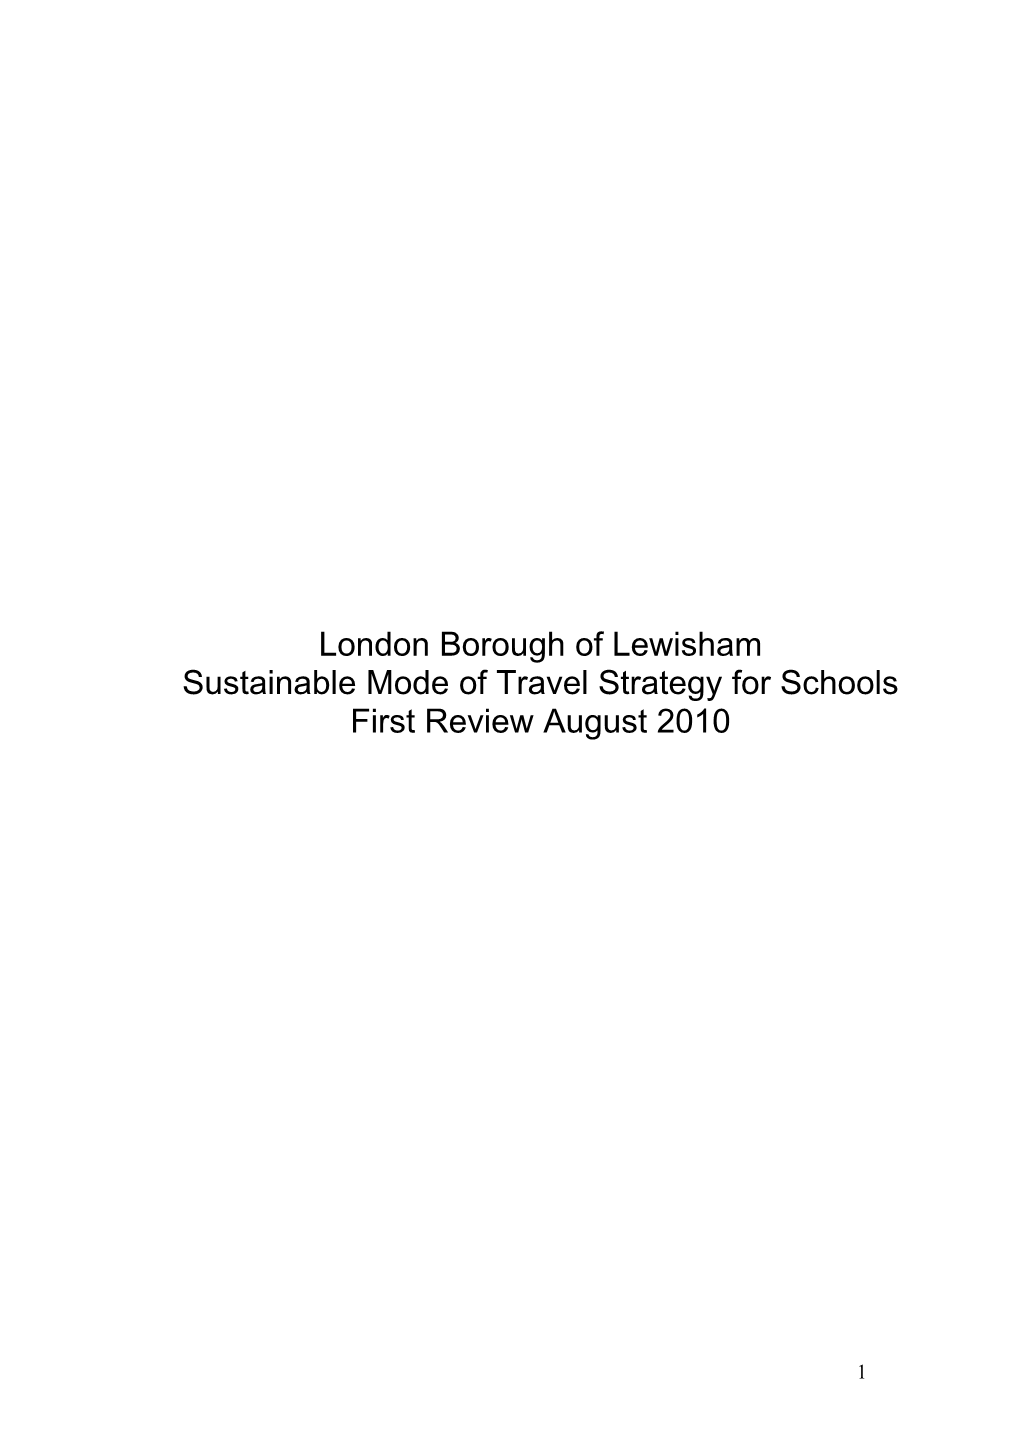 Sustainable Mode of Travel Strategy for Schools First Review August 2010